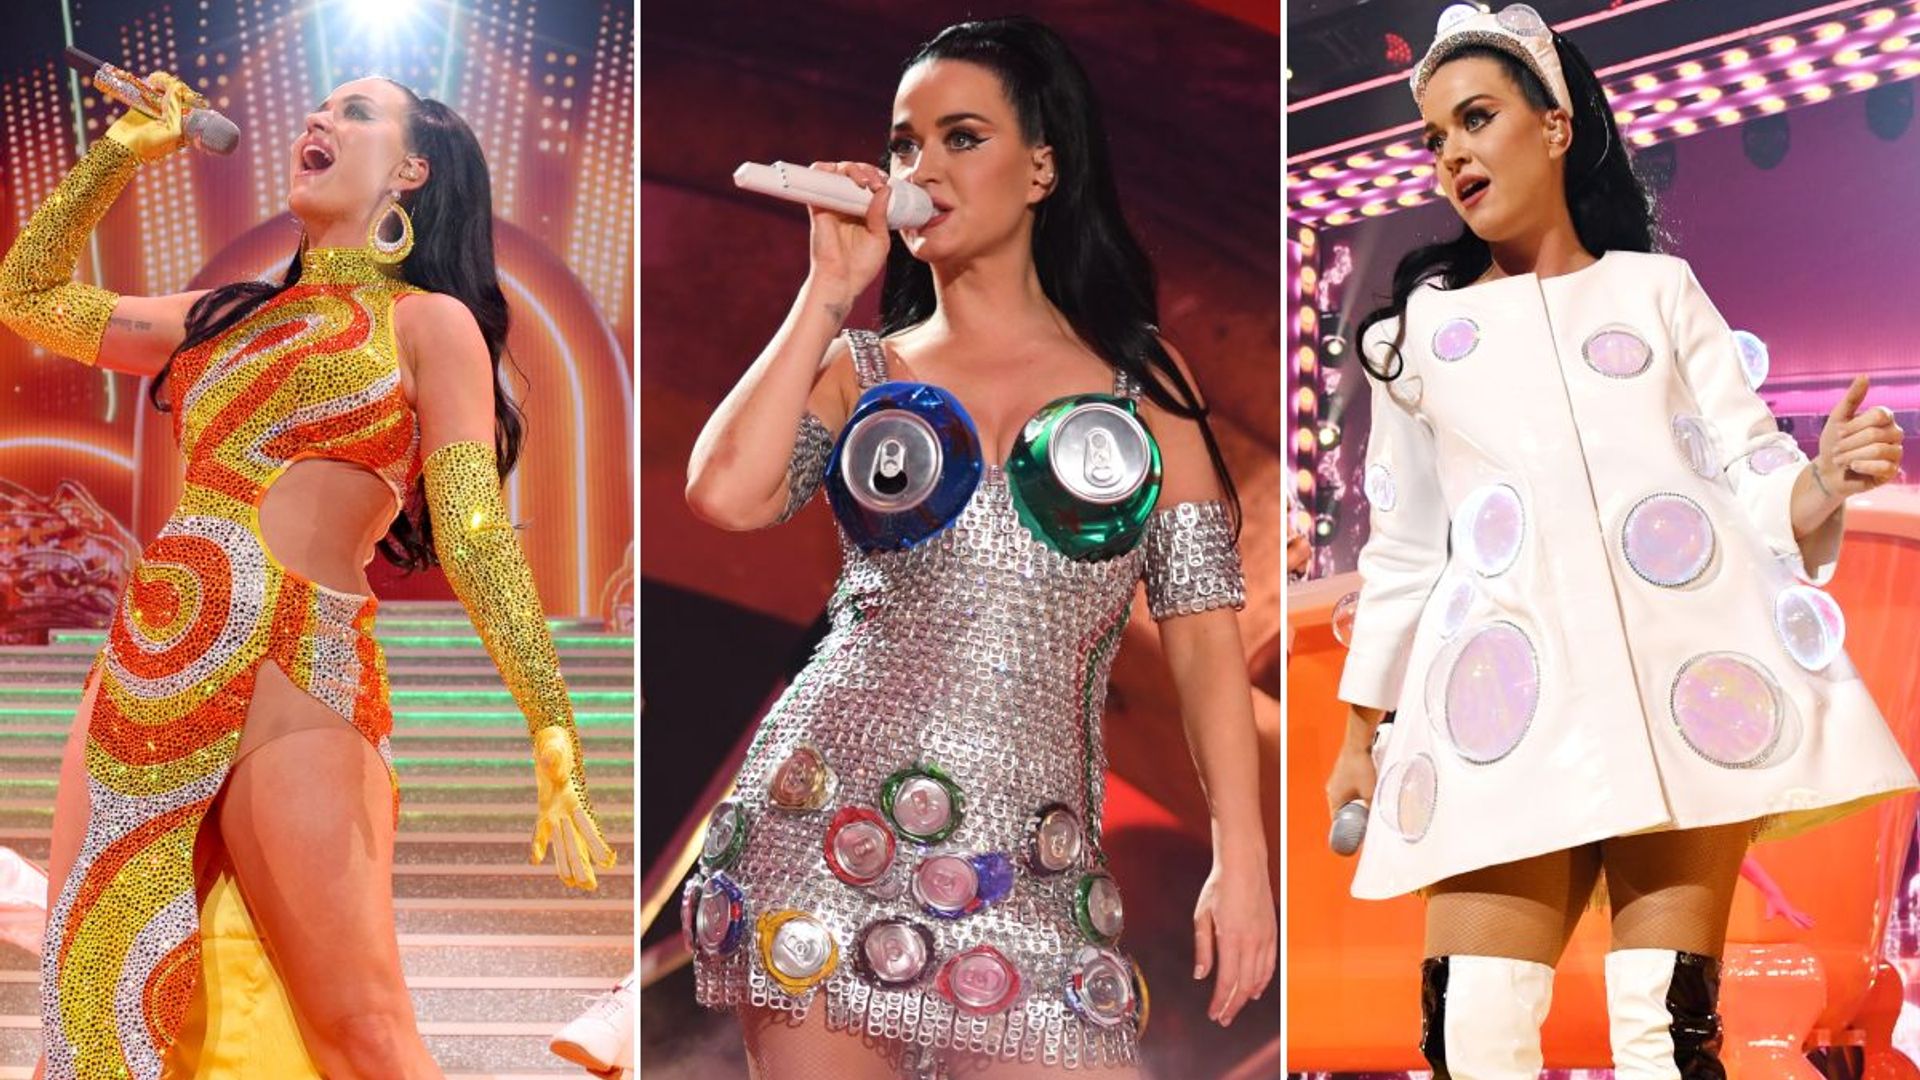 All of Katy Perry's surreal and stunning Las Vegas outfits